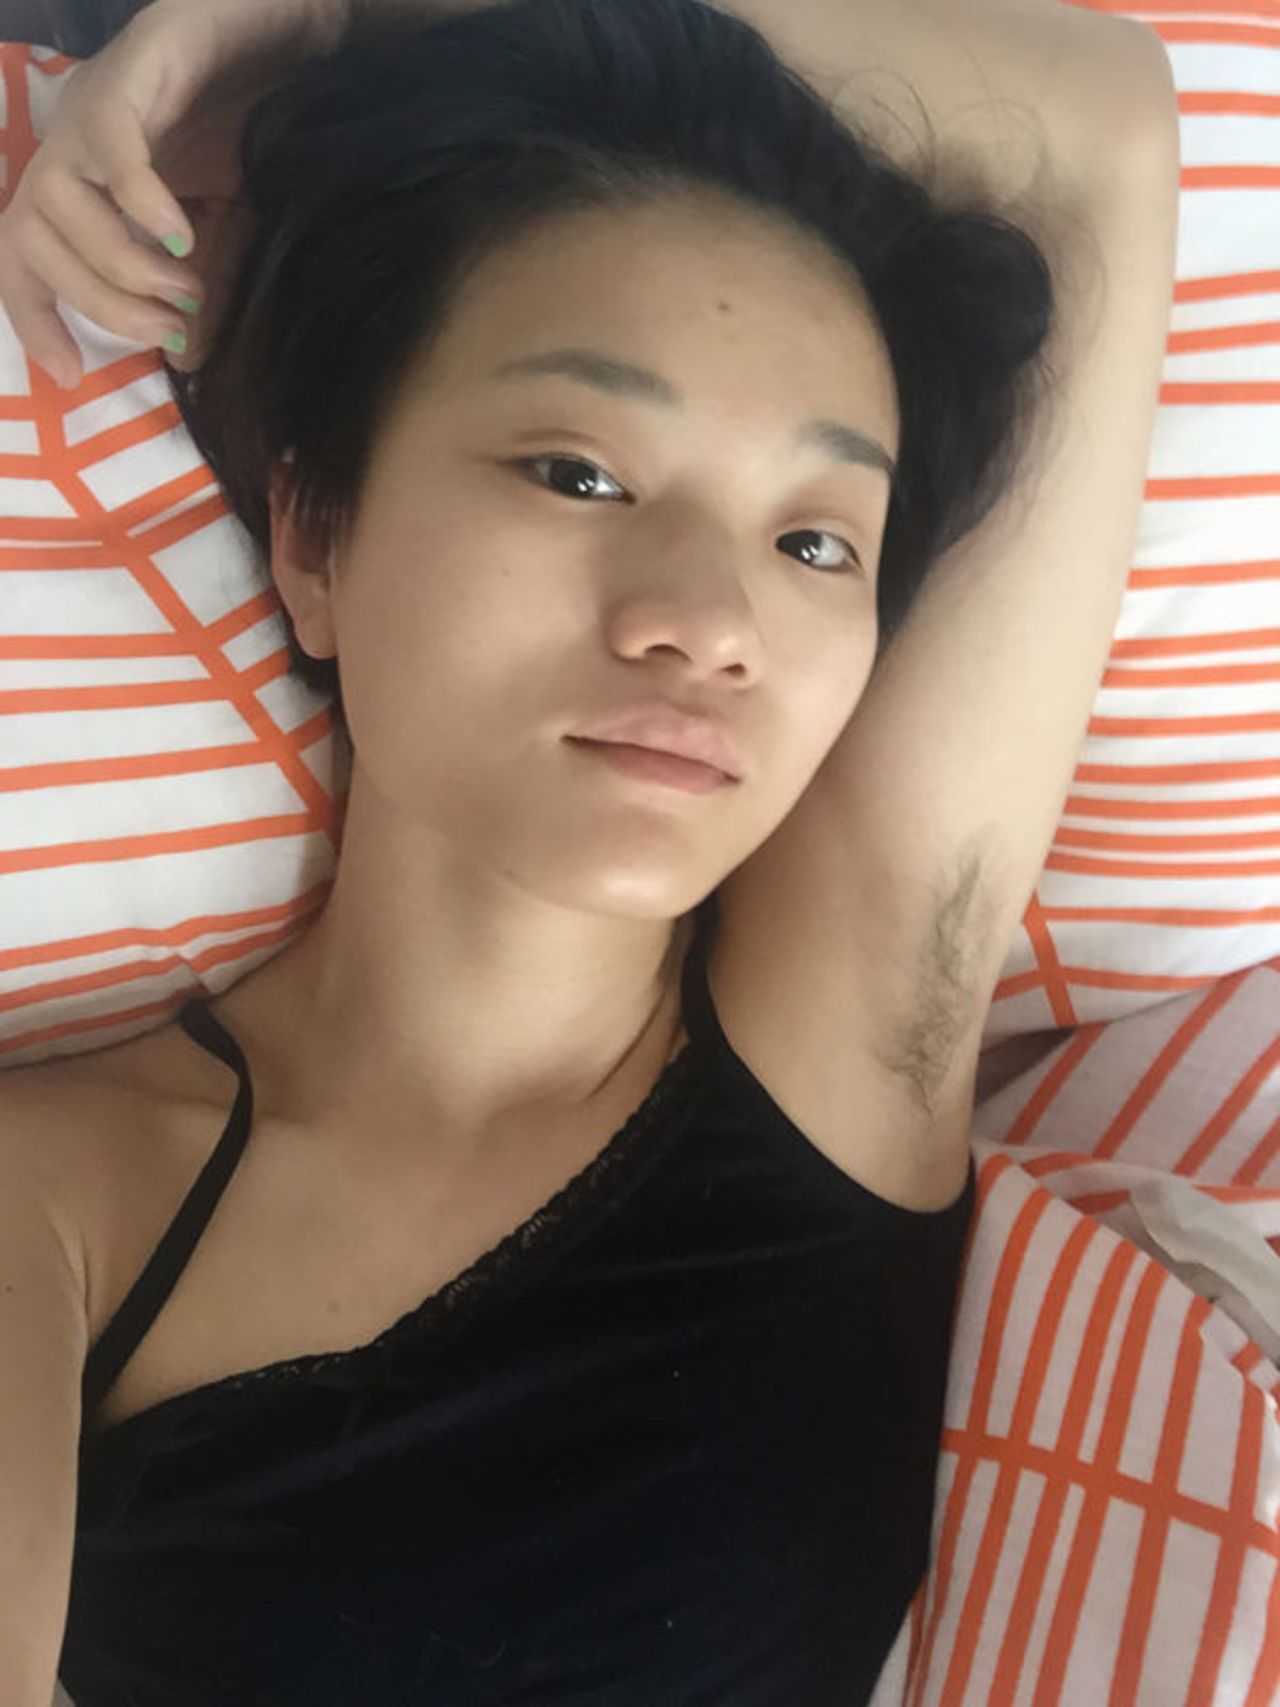 Romantic Armpit Sex Videos - Chinese feminists show off armpit hair in photo contest | CNN